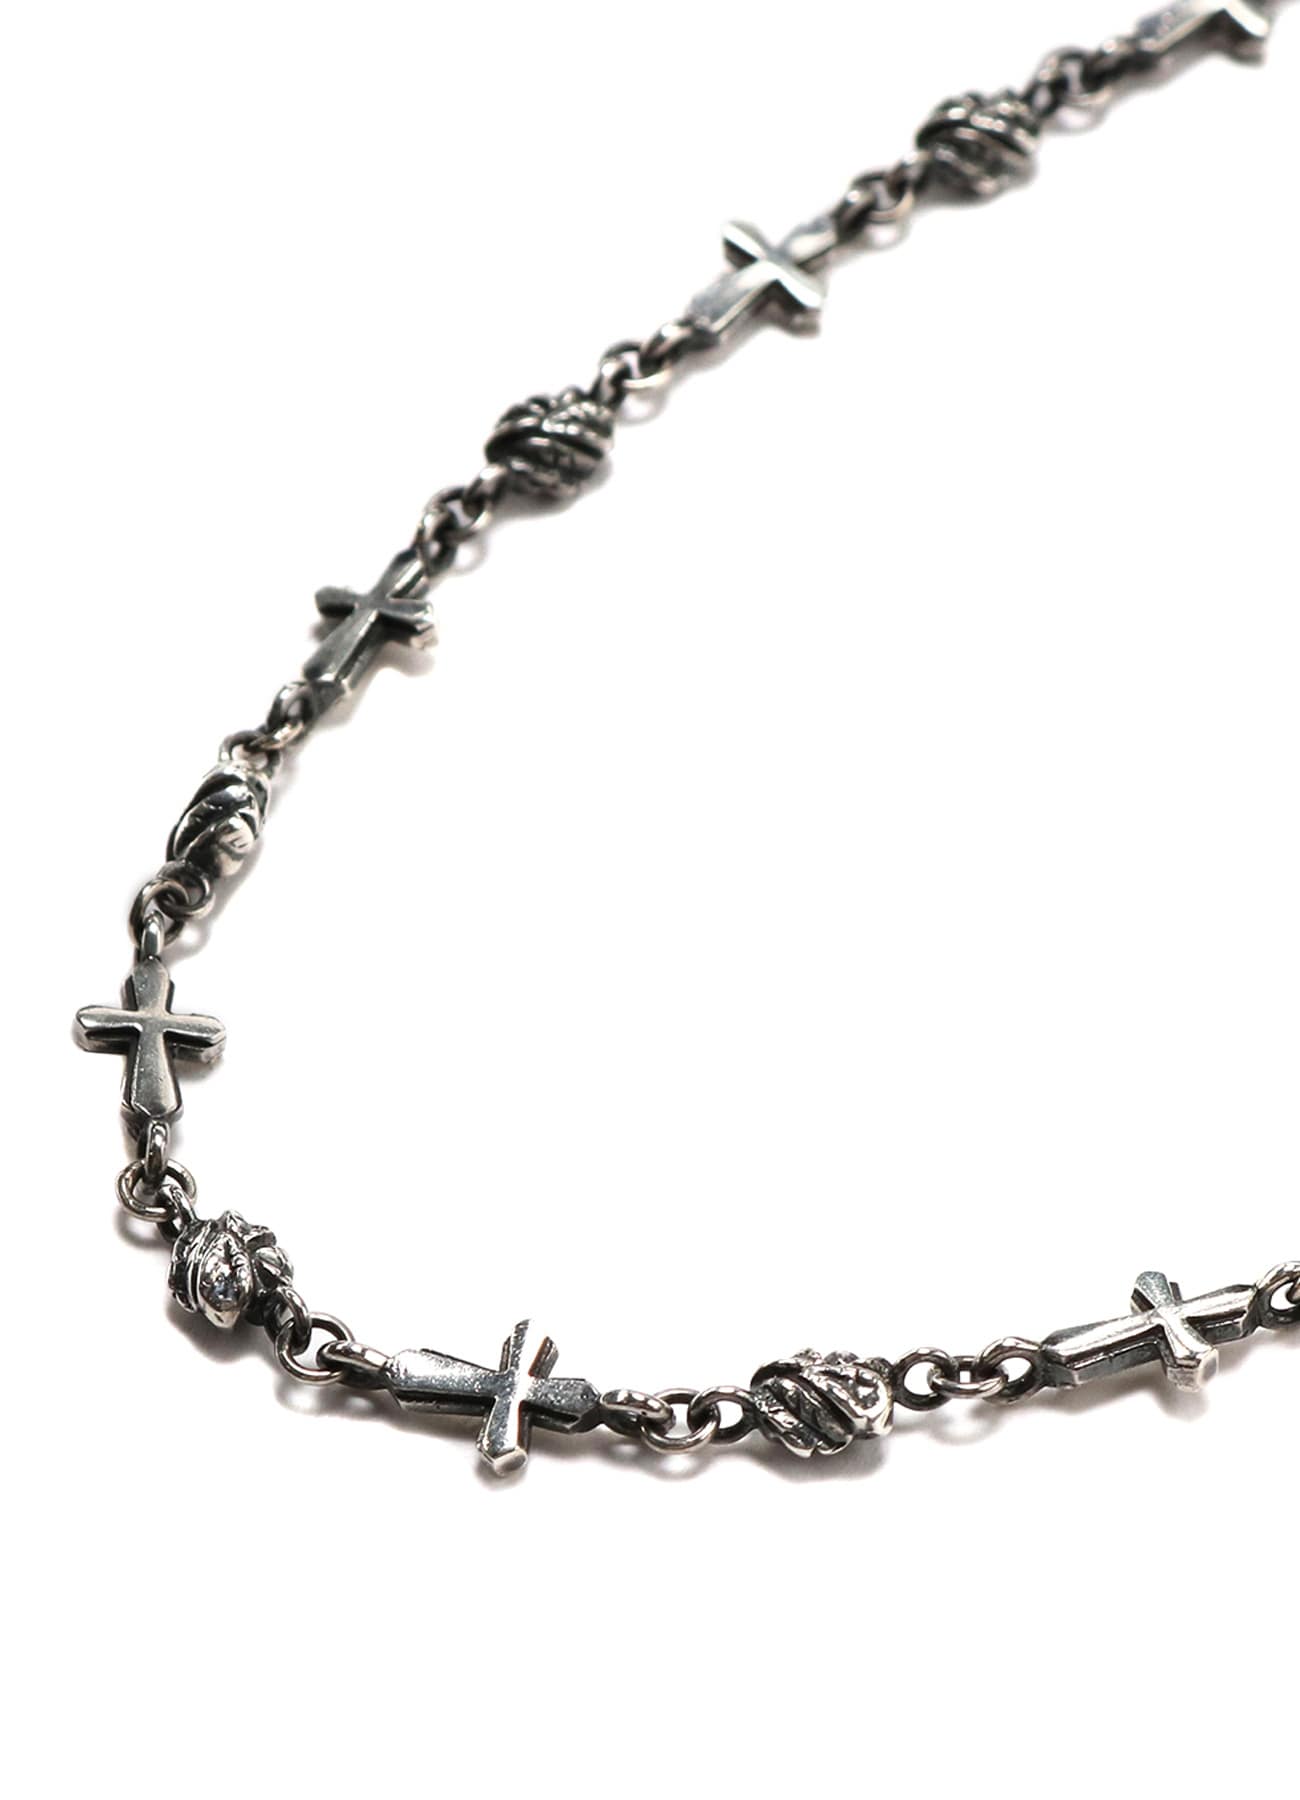 SILVER 950 GOTHIC CROSS CHAIN NECKLACE